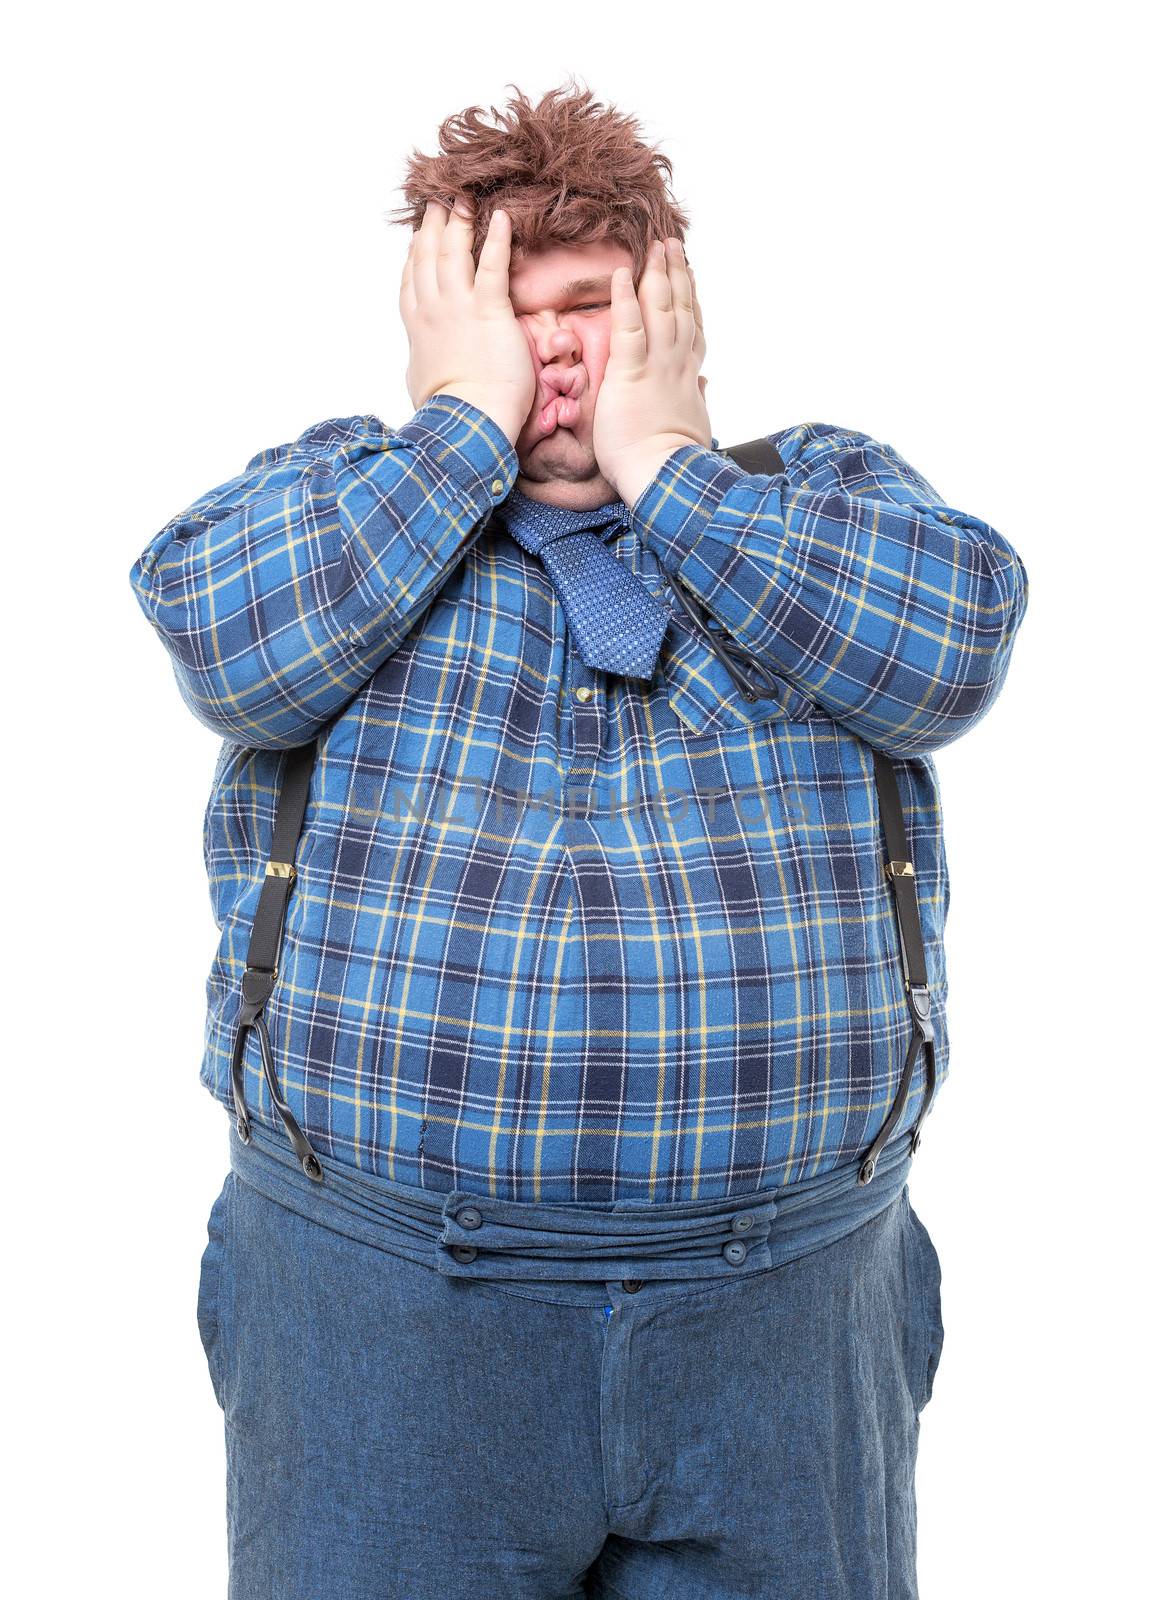 Overweight obese country yokel squashing his face, on white background